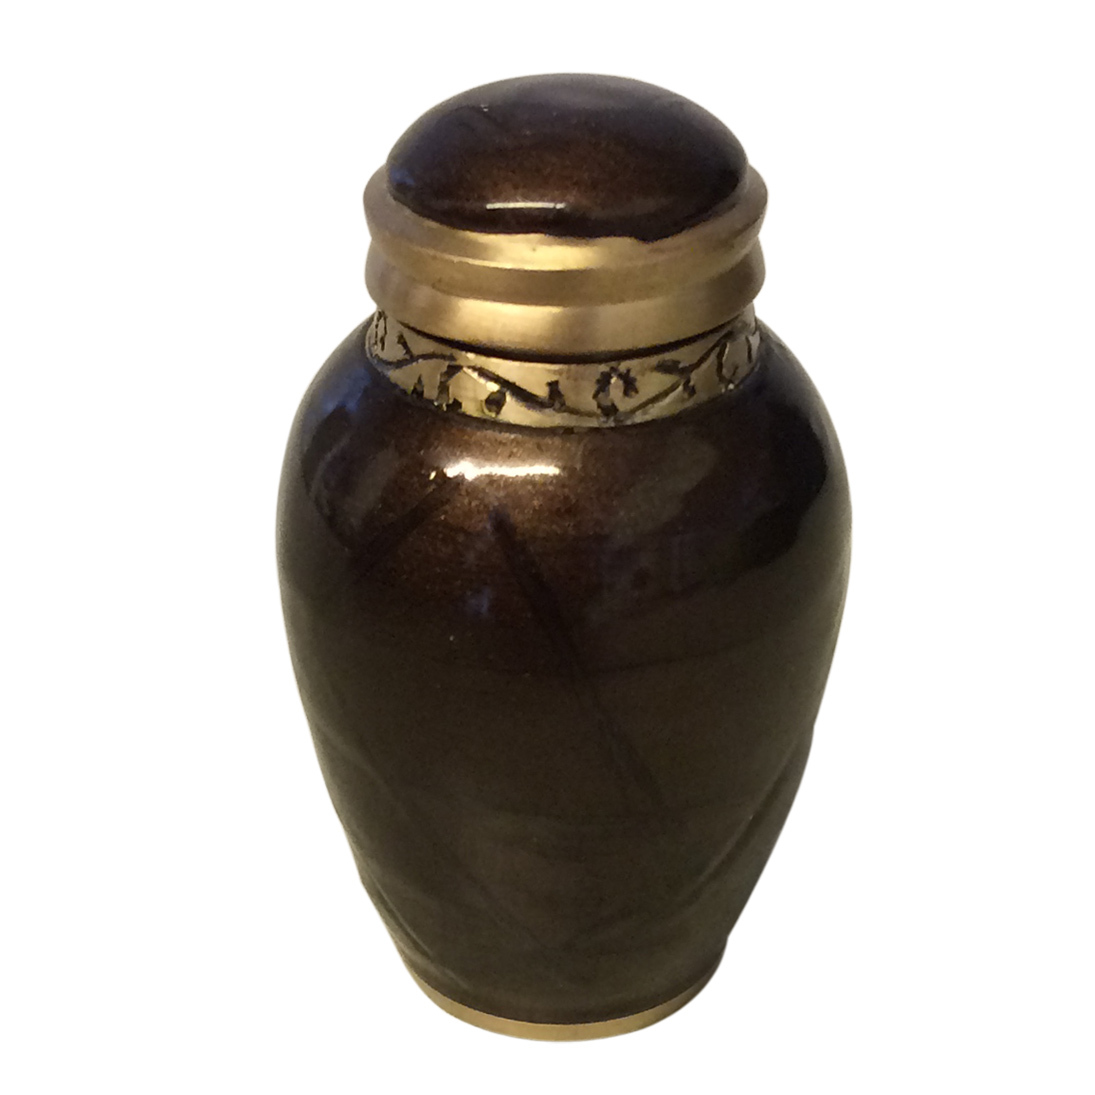 Blessing Bronze Small Keepsake Urn, Cremation Urns for Ashes